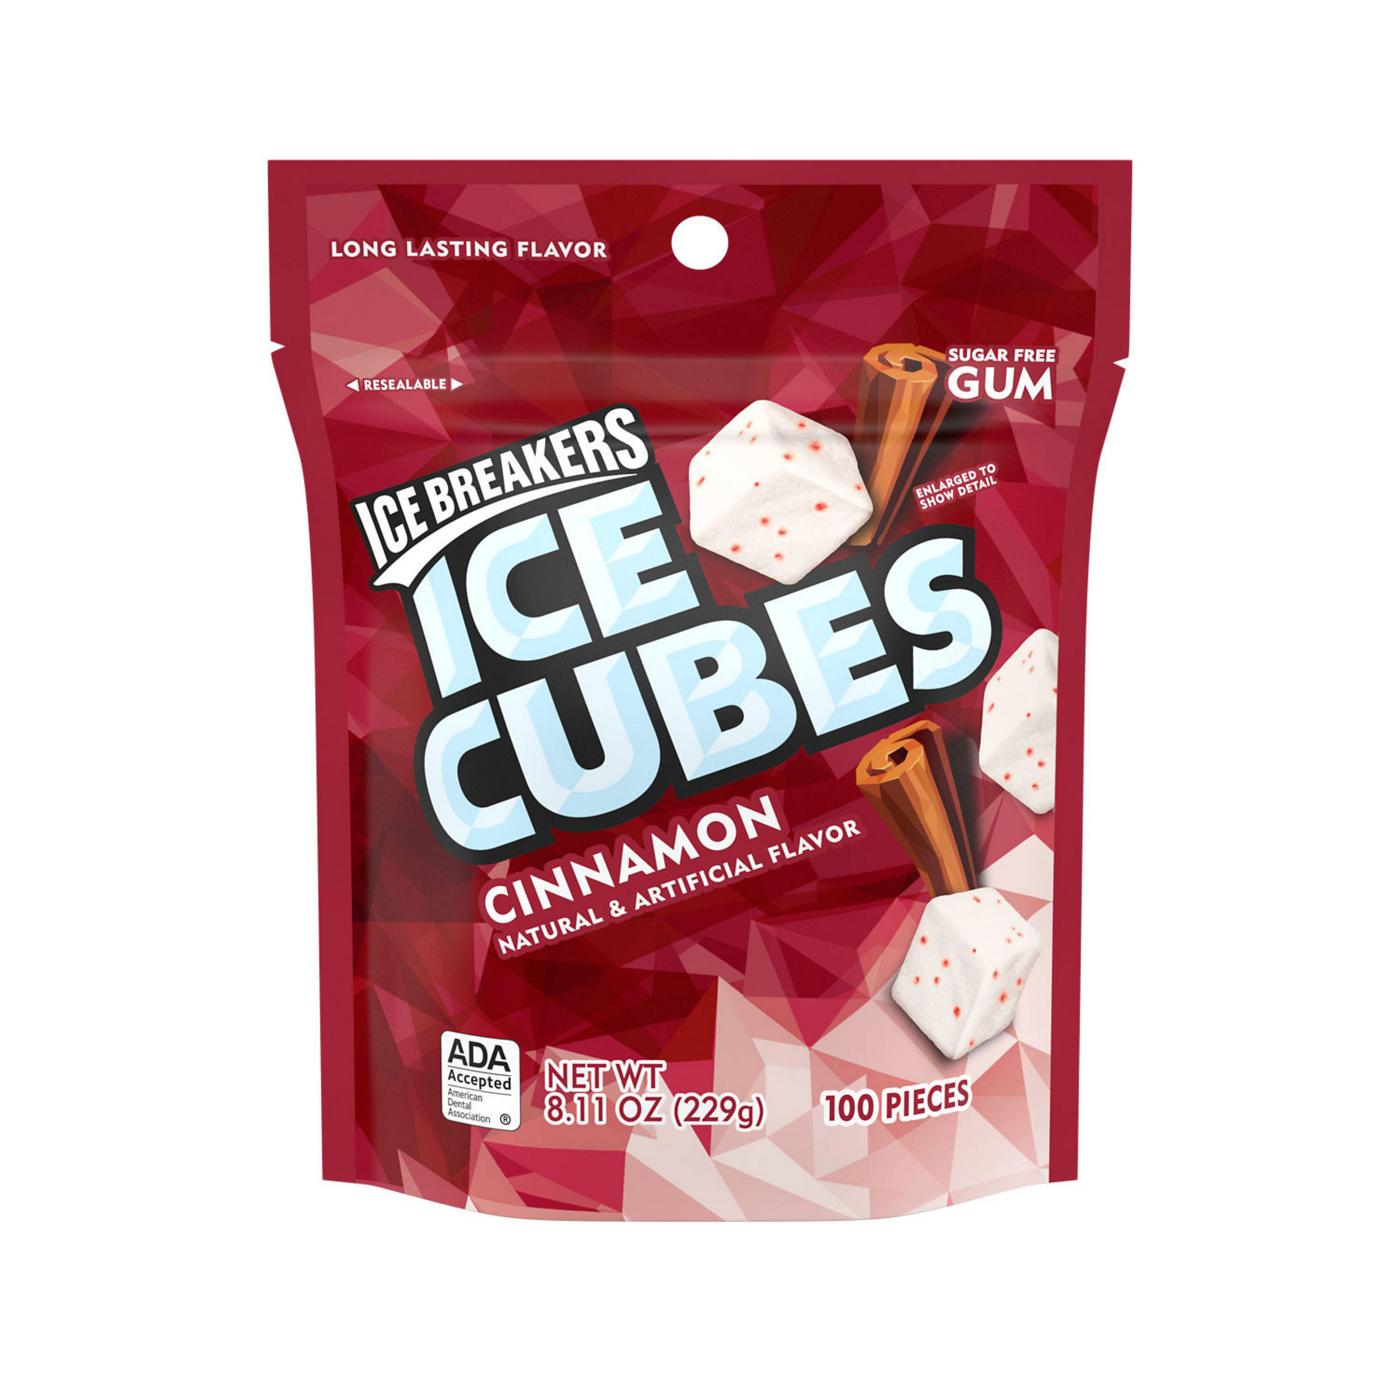 Ice Breakers Ice Cubes Cinnamon Sugar Free Gum Pouch; image 1 of 5